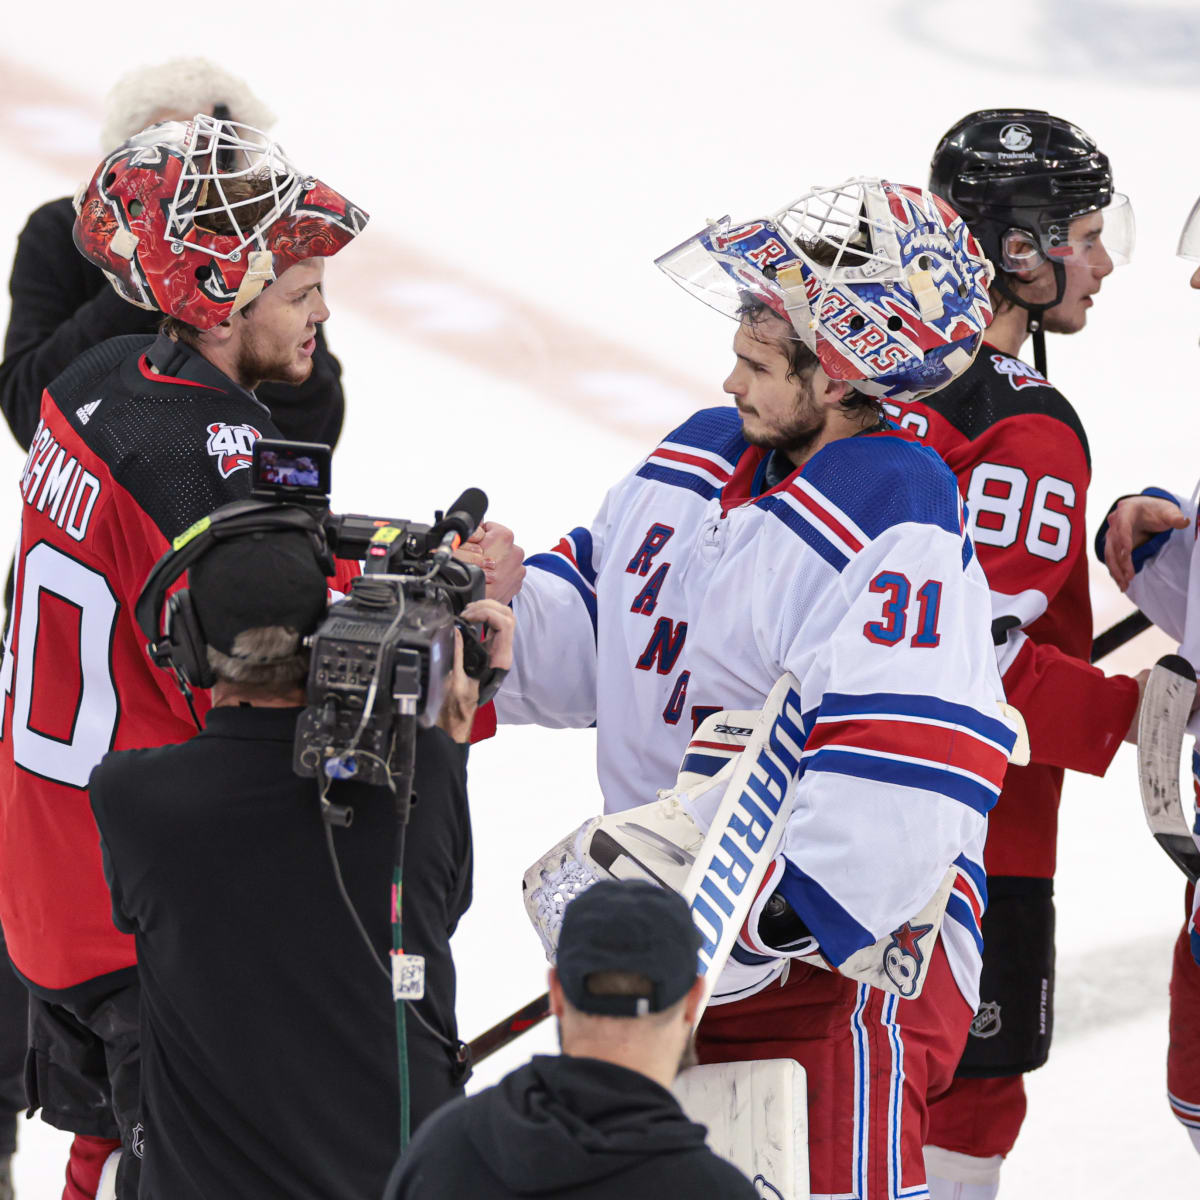 Rangers beat Devils for third time in five days